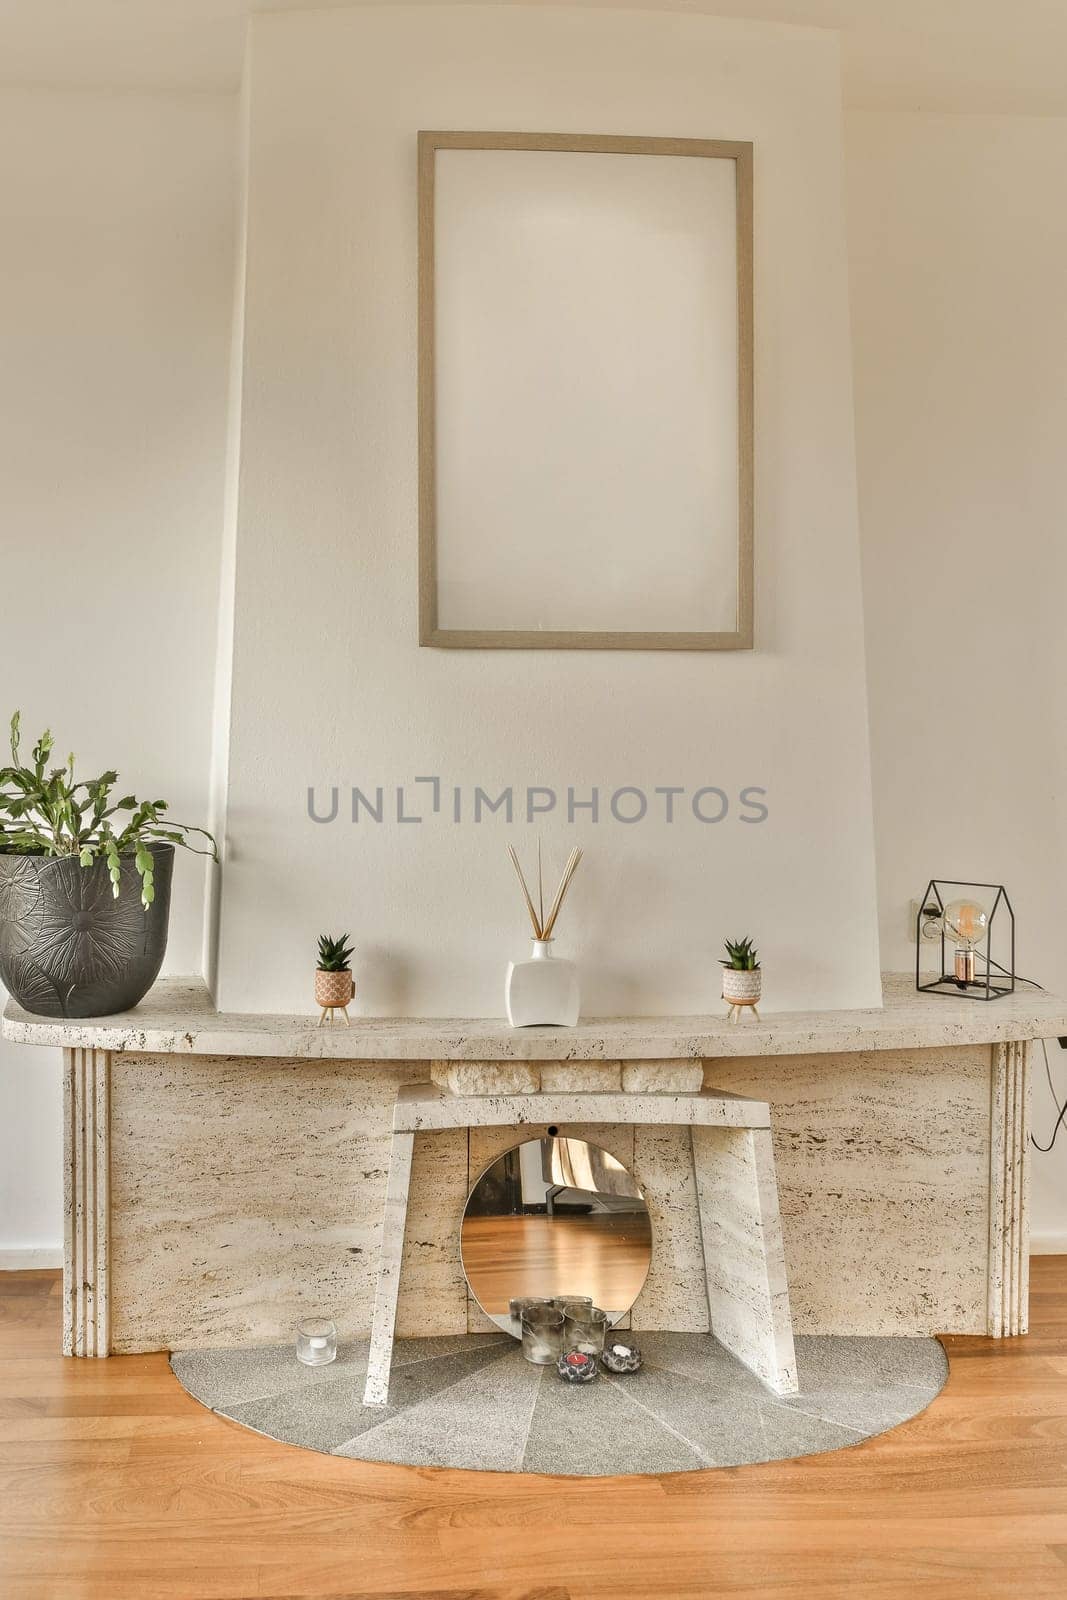 a fireplace in the corner of a room with wood flooring and white walls behind it is a large mirror